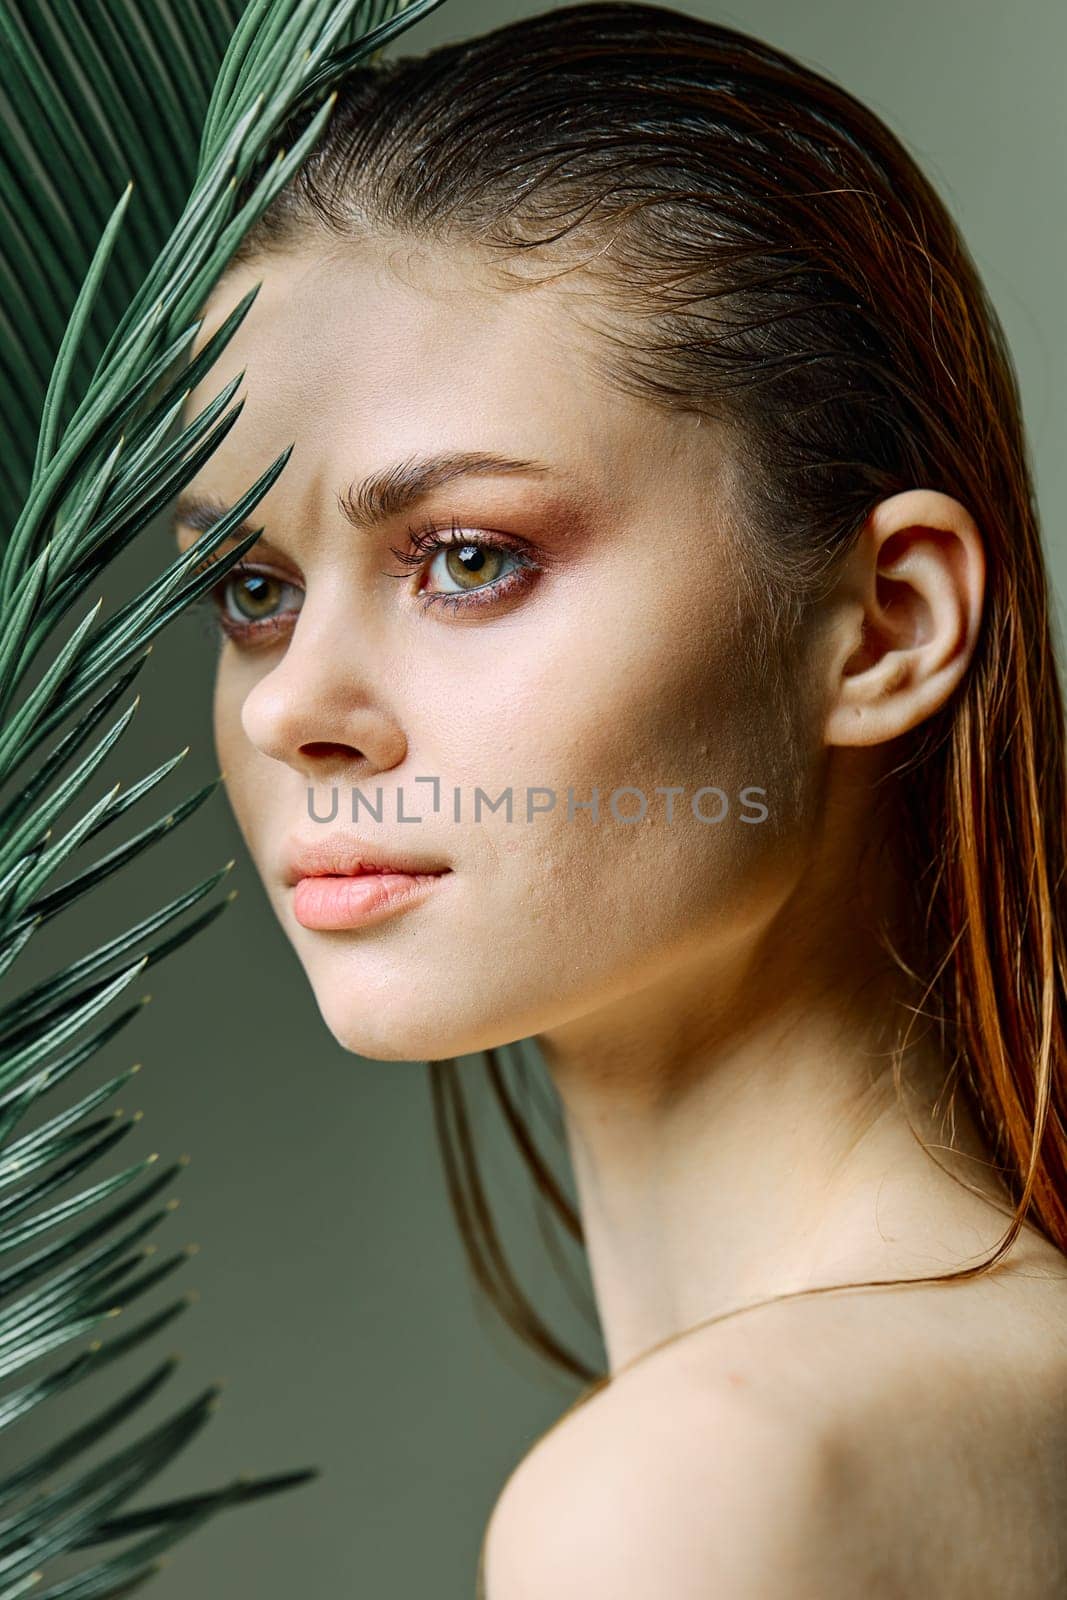 vertical photo, portrait of an elegant woman with slicked back hair, standing with a palm leaf holding it near her face. Photo without retouching. High quality photo